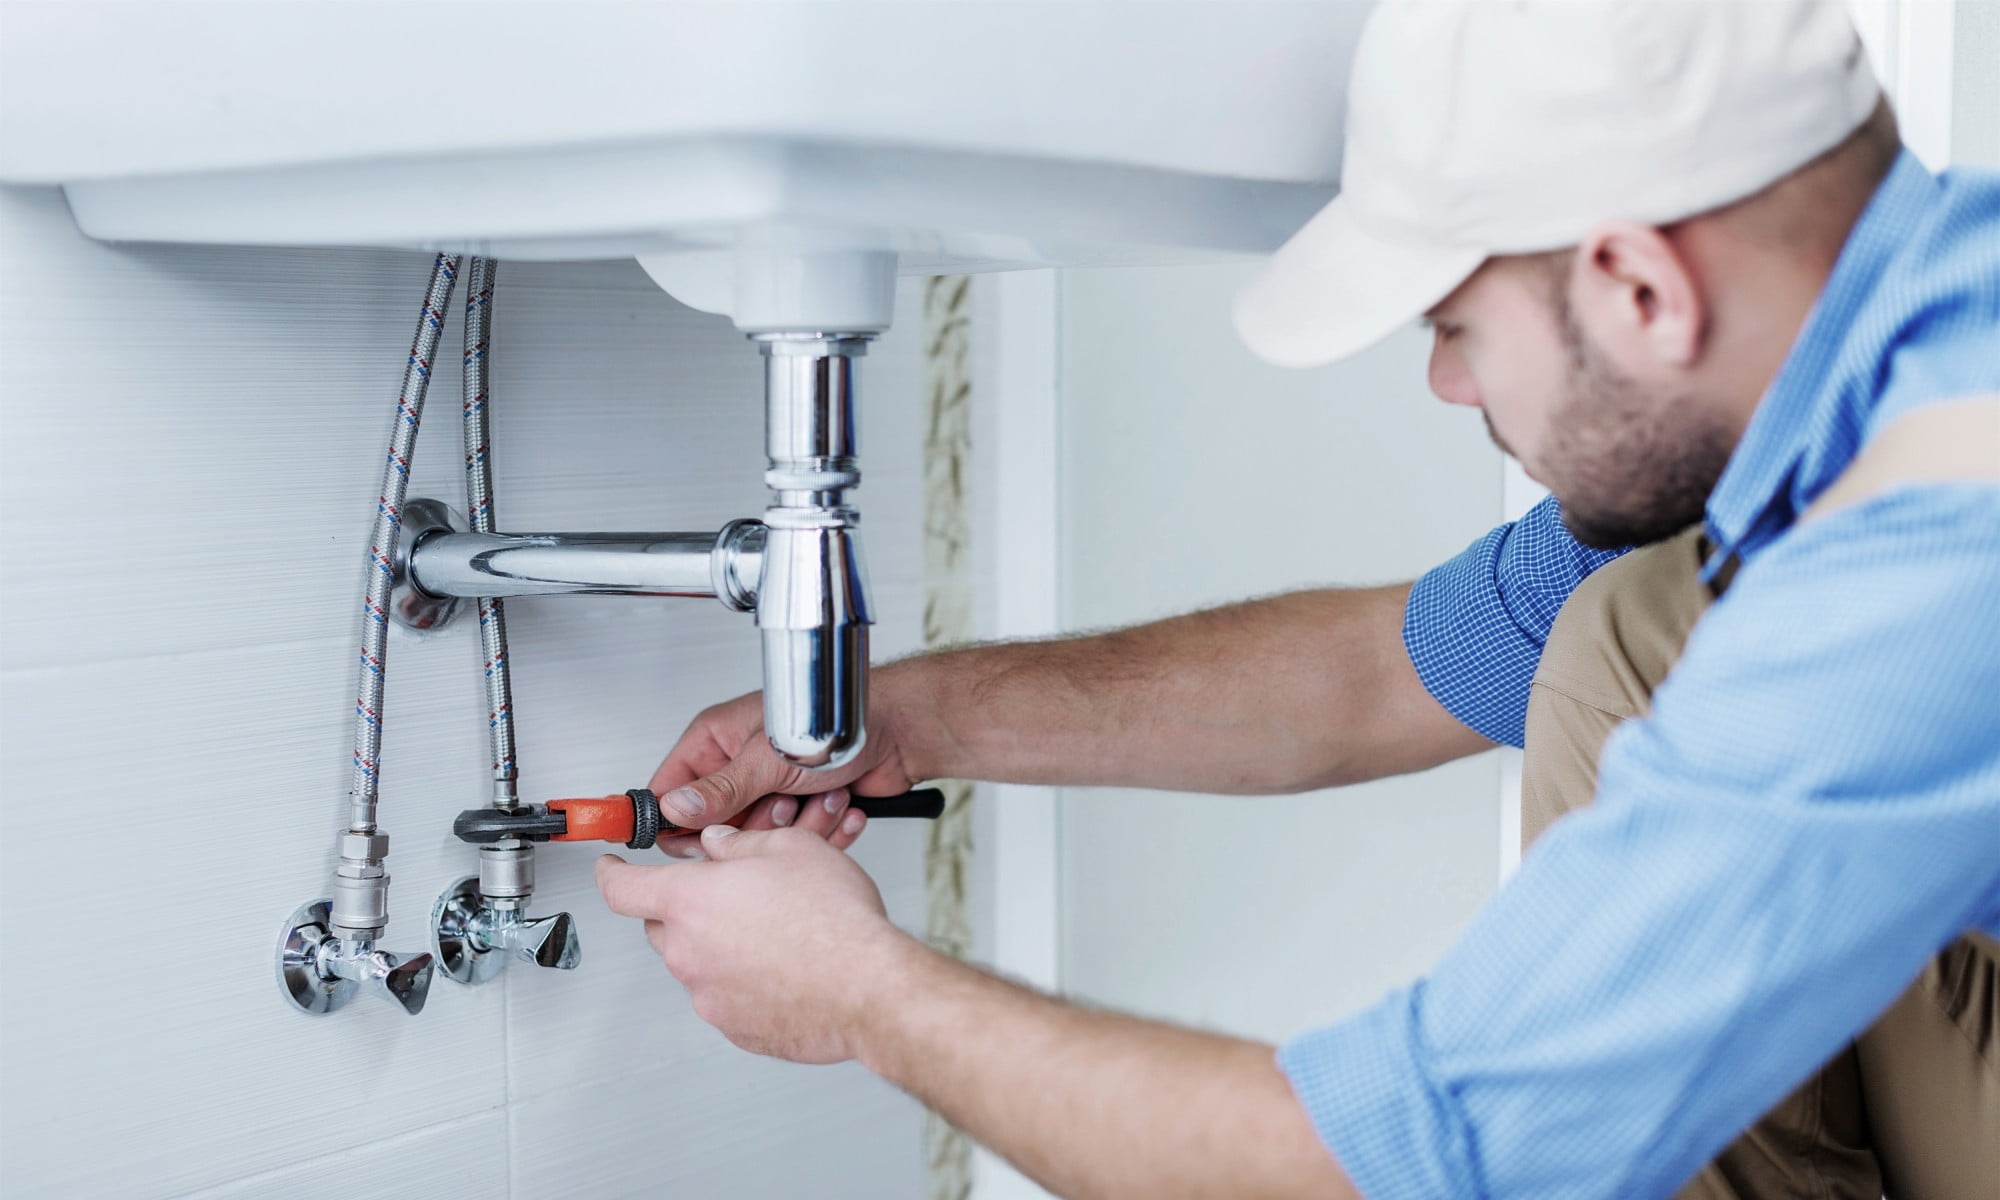 Do you have a problem with your drainage system or home plumbing? Here are the homeownership benefits of hiring the best plumbing company in your local area.